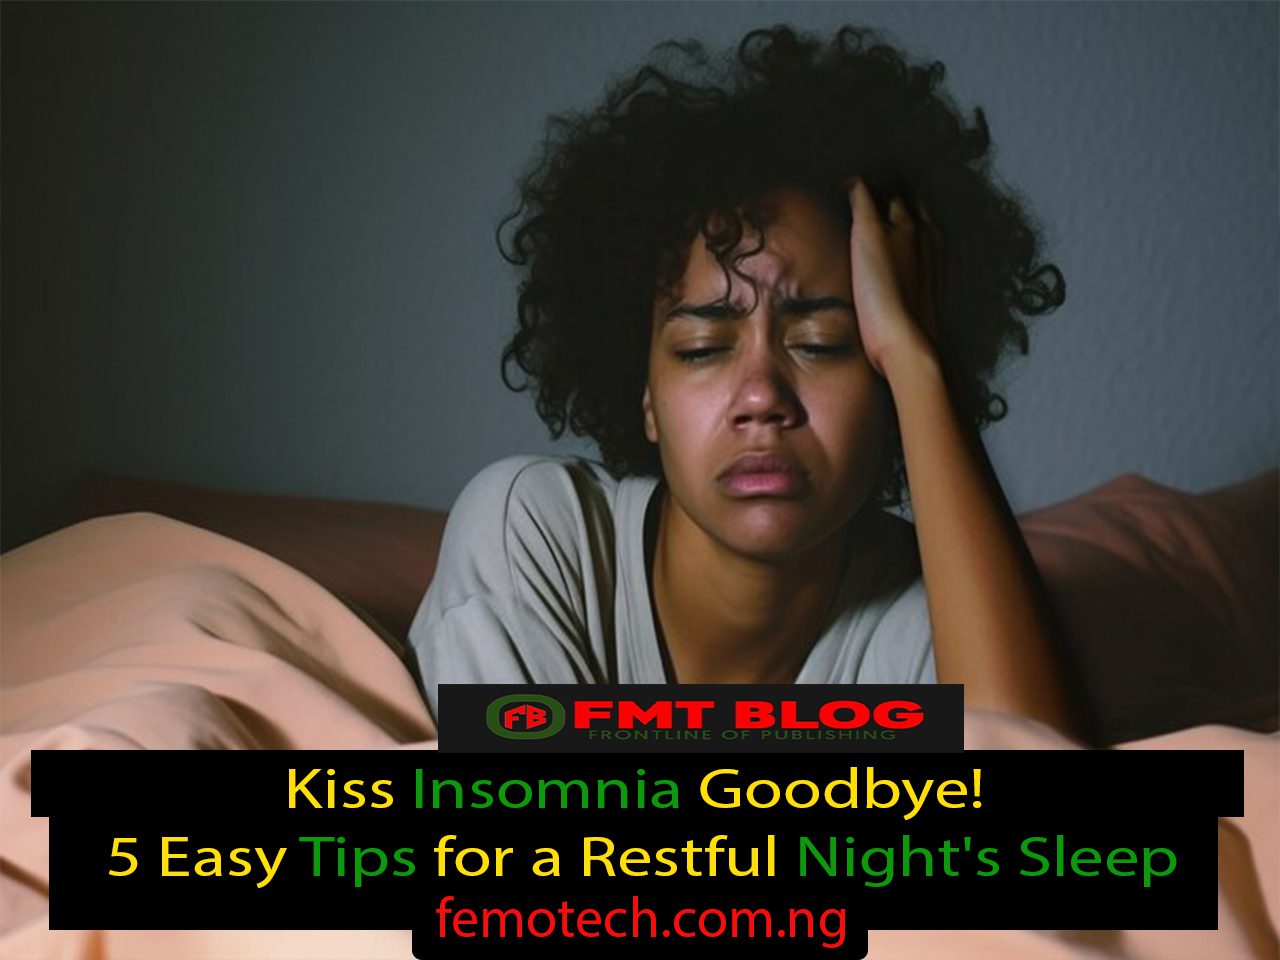 Kiss Insomnia Goodbye! 5 Easy Tips for a Restful Night’s Sleep